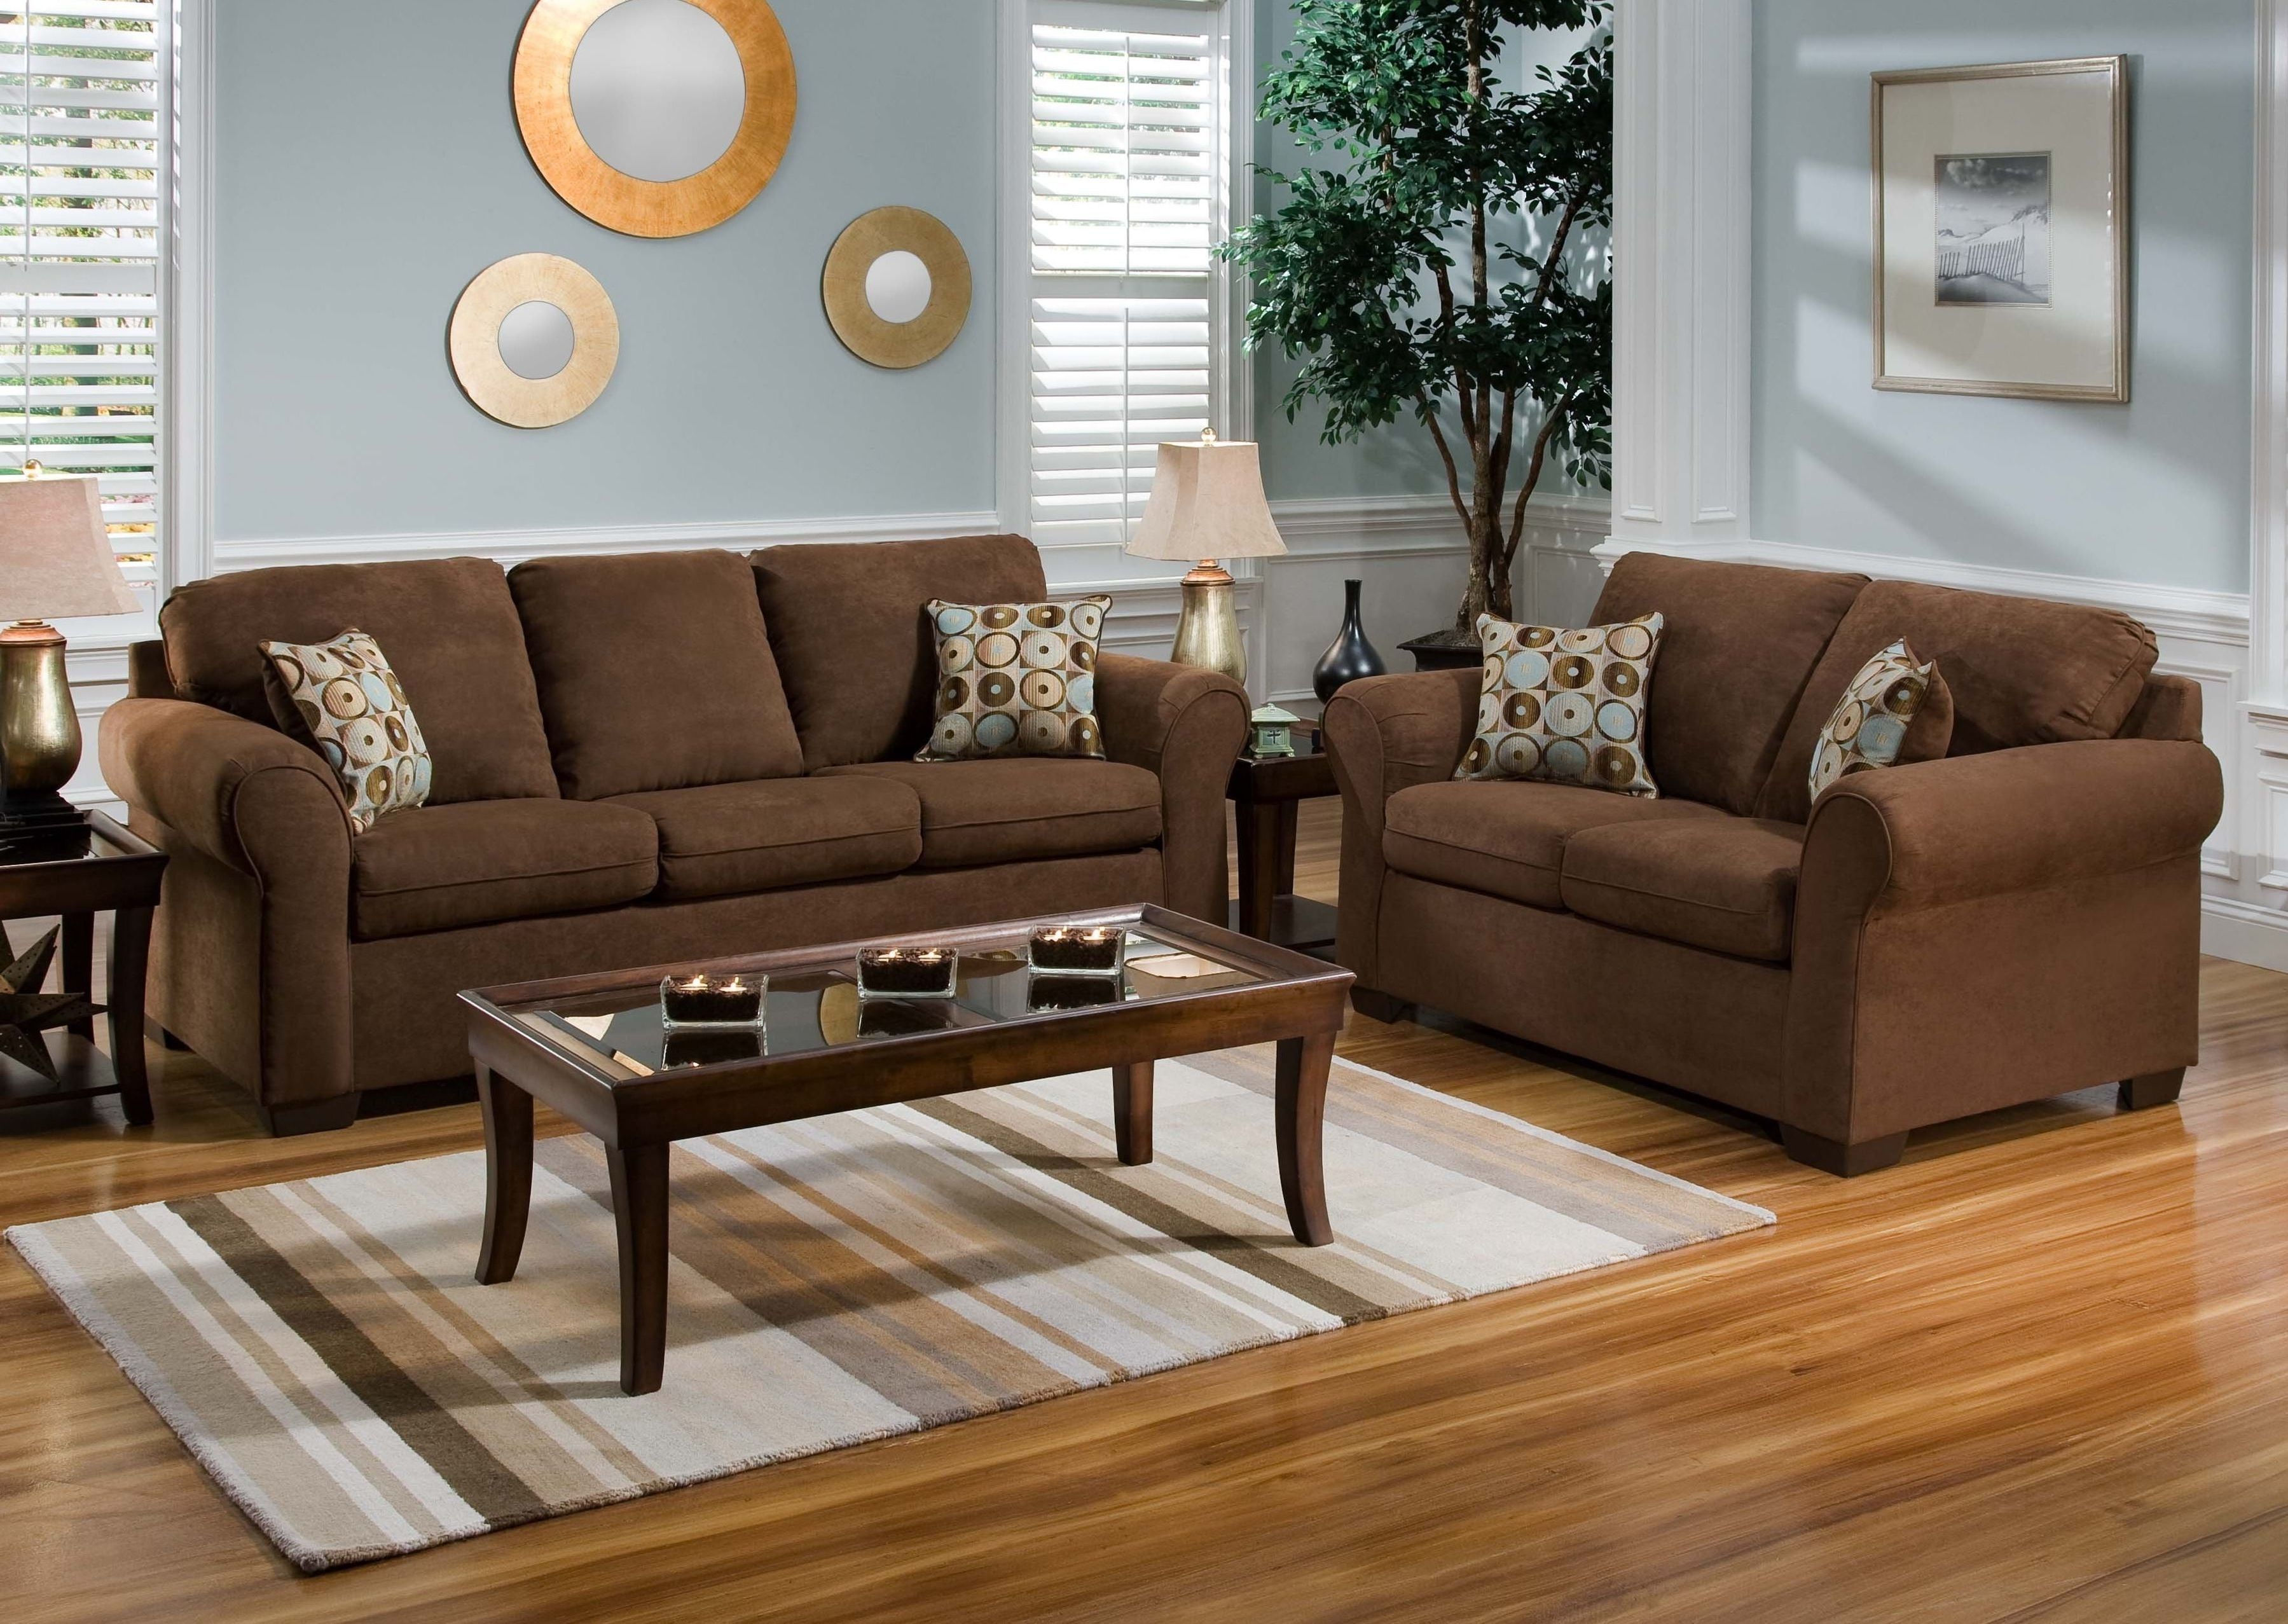 Ideas To Paint Living Room With Brown Sofa